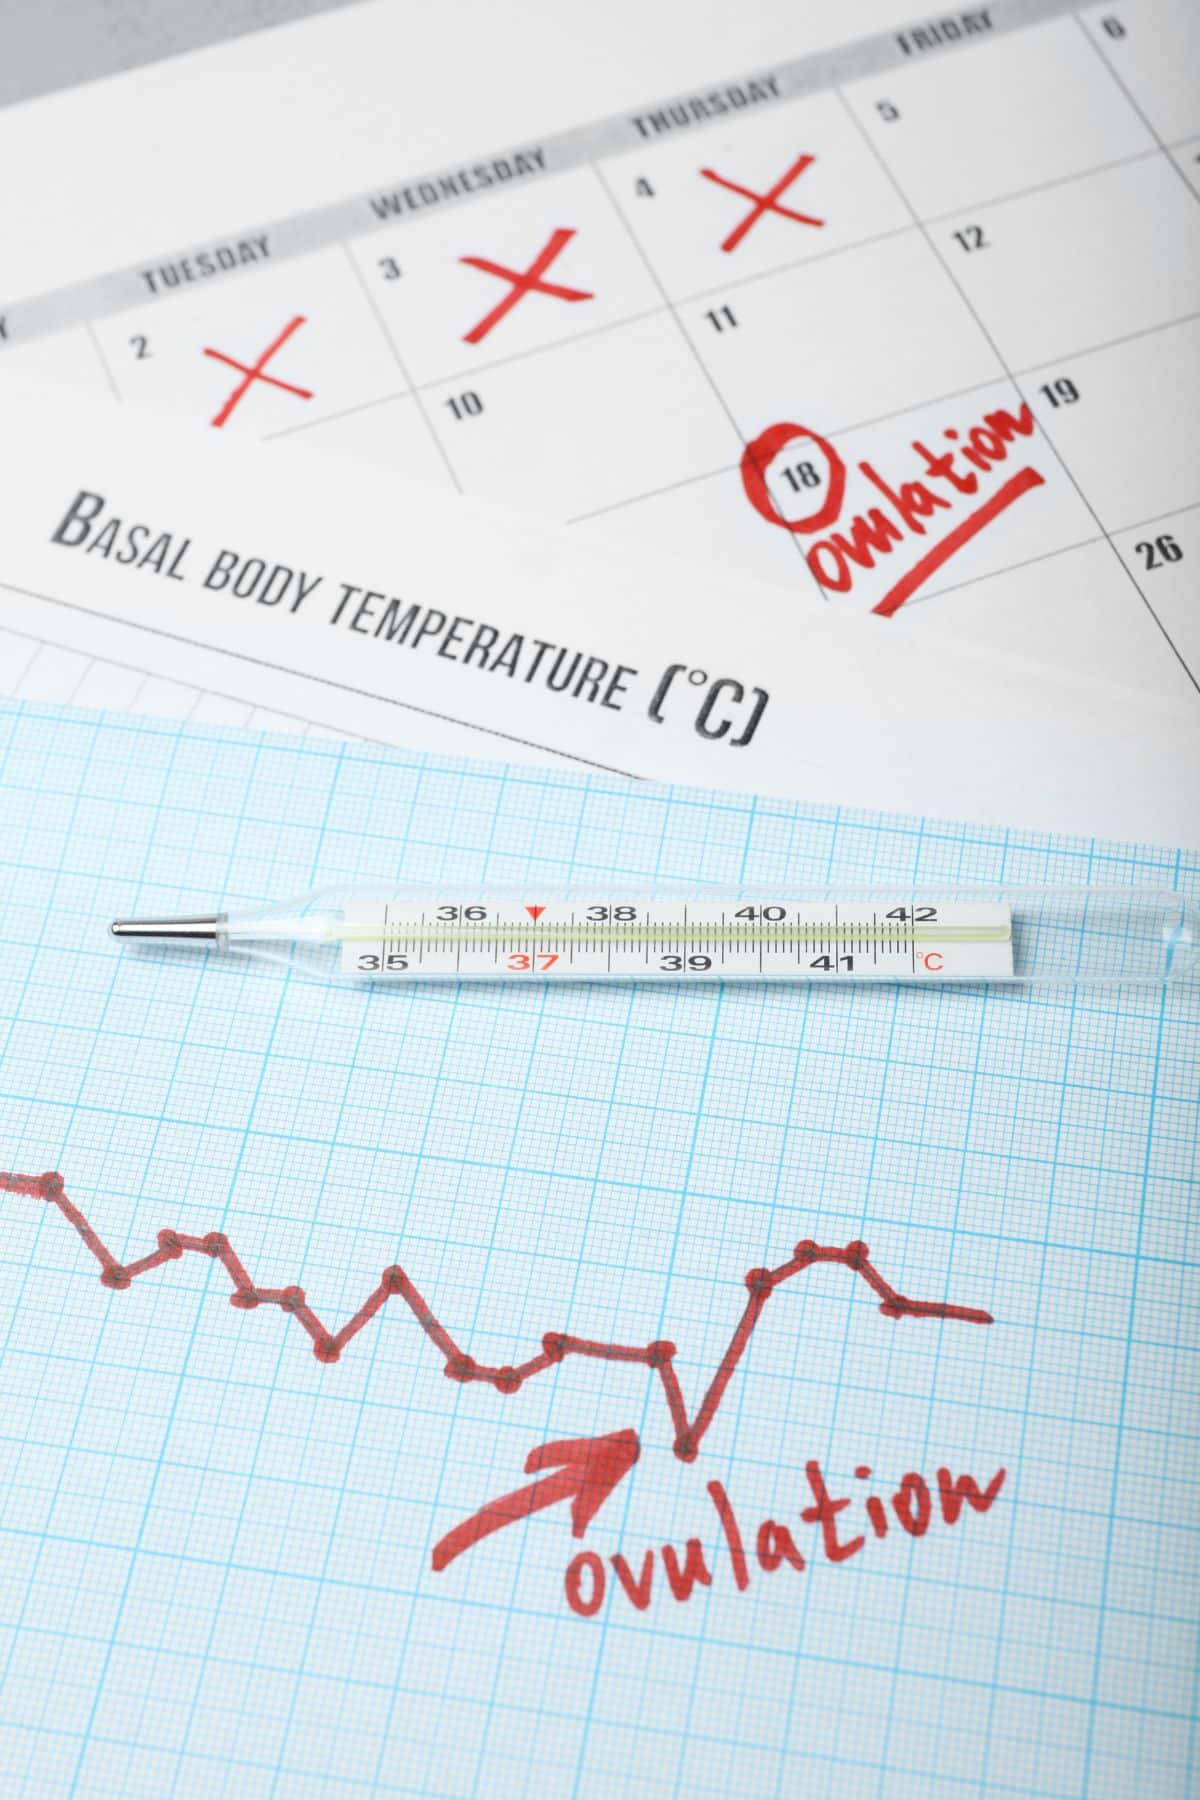 chart measuring body temperature and ovulation timing.